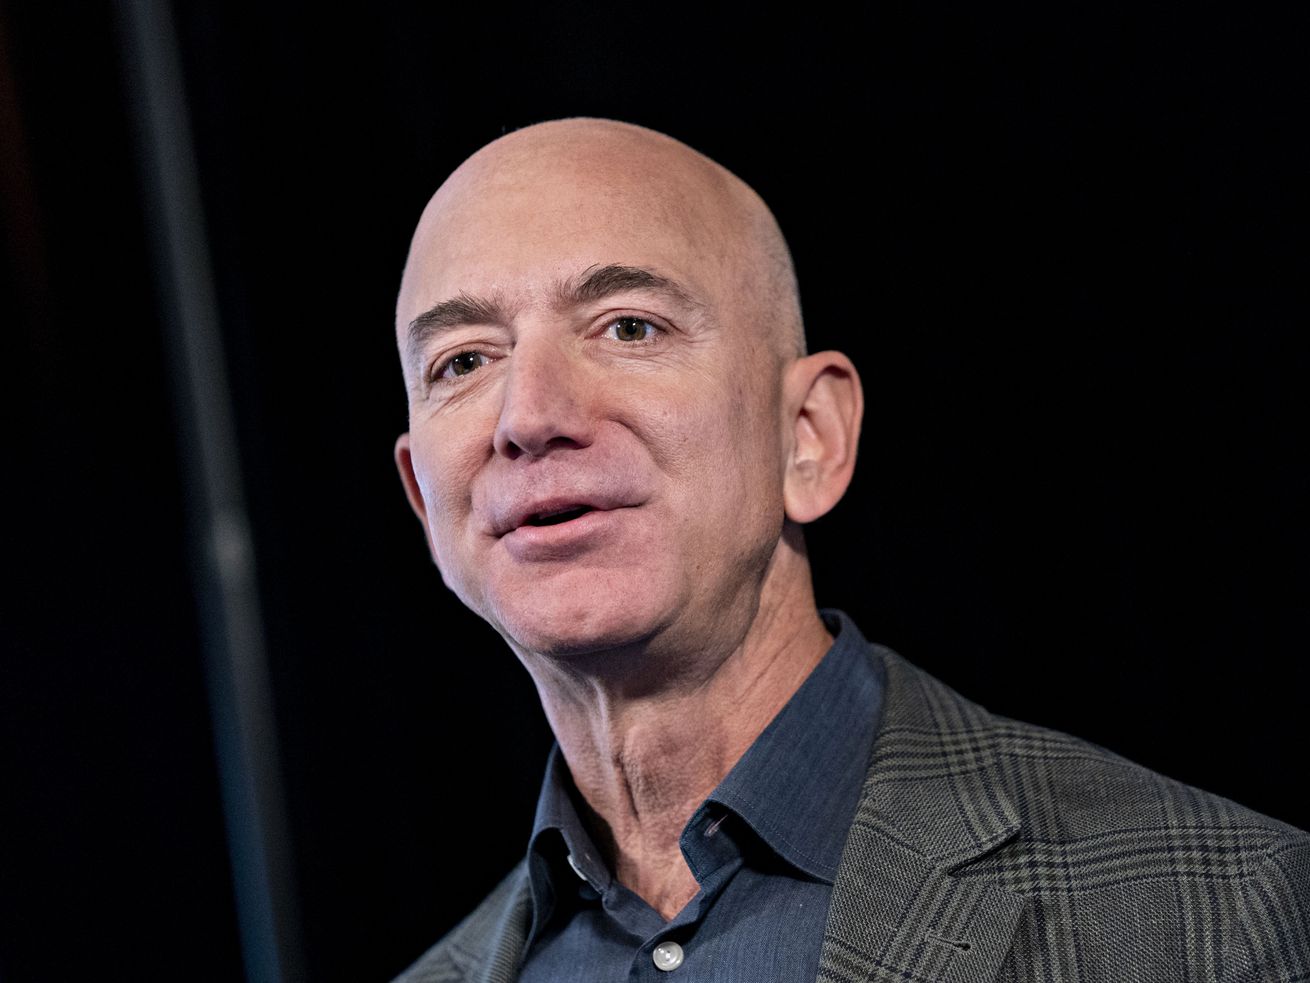 Jeff Bezos says 94% of Amazon workers would recommend their job to a friend. Amazon workers say that stat is unreliable.